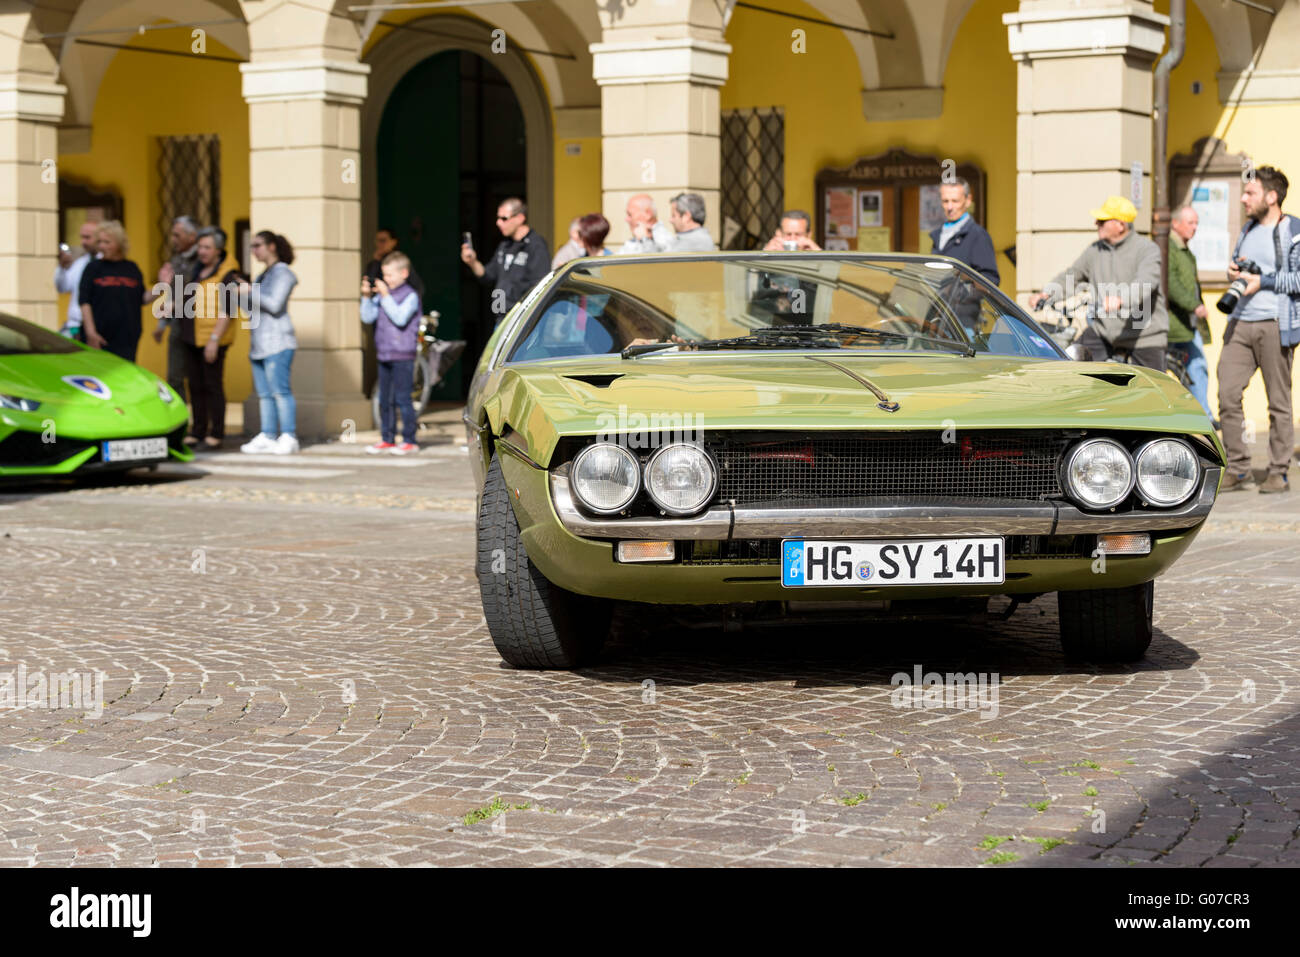 Sant'Agata Bolognese, Italy. 30th April, 2016. Lamborghini parade in front of the municipality of Sant'Agata Bolognese for the 100th Ferruccio Lamborghini Anniversary Stock Photo